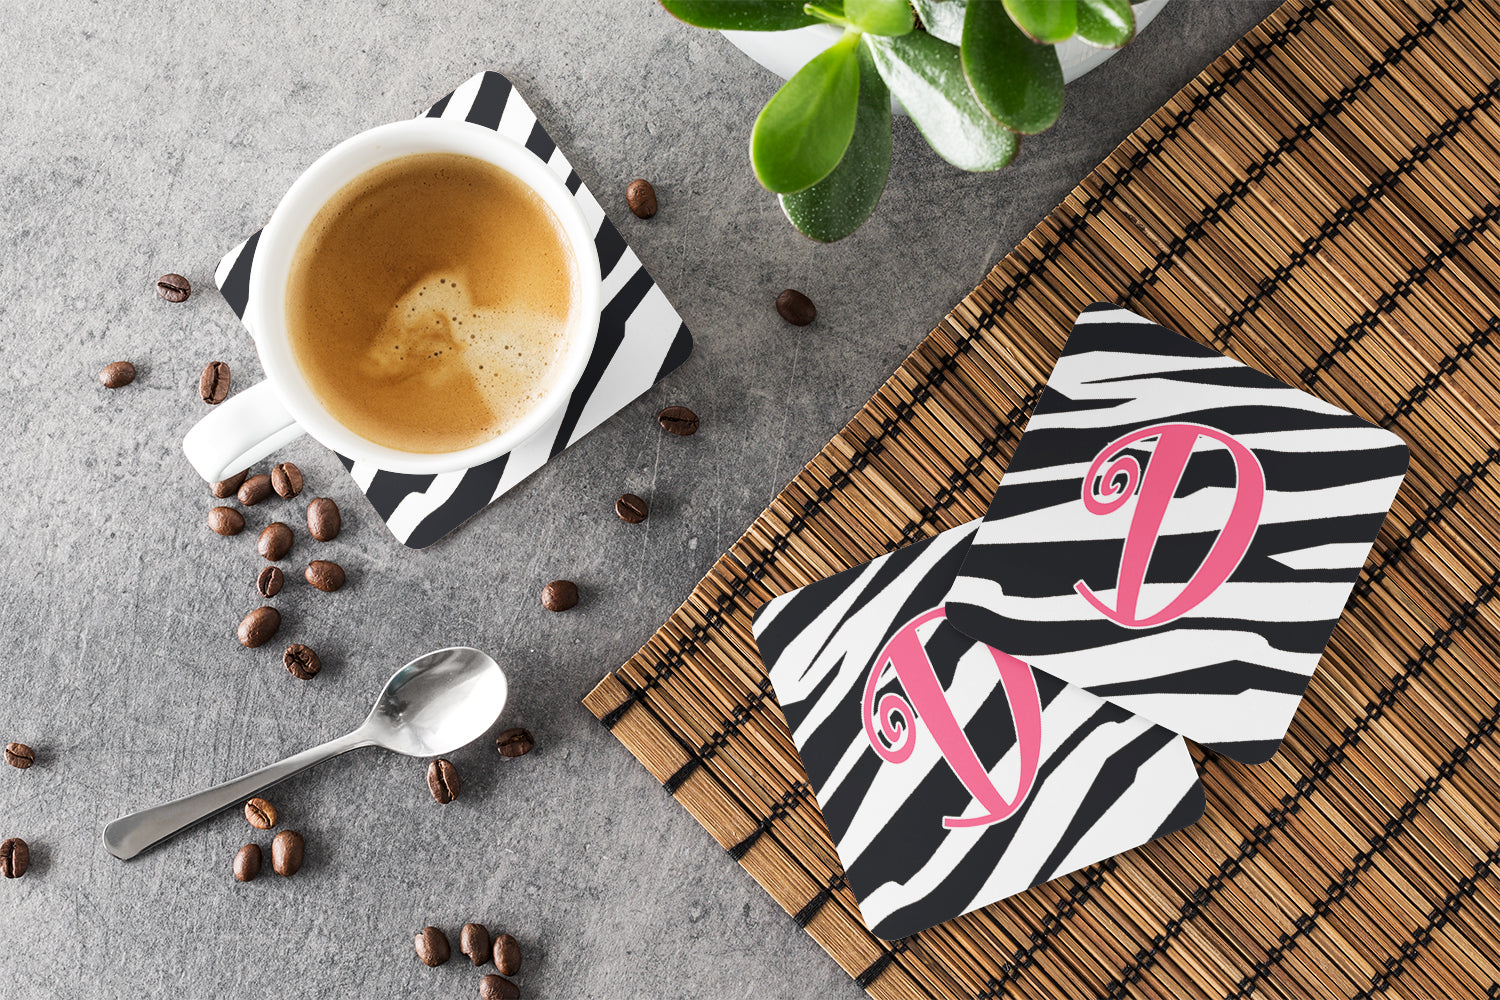 Set of 4 Monogram - Zebra Stripe and Pink Foam Coasters Initial Letter D - the-store.com